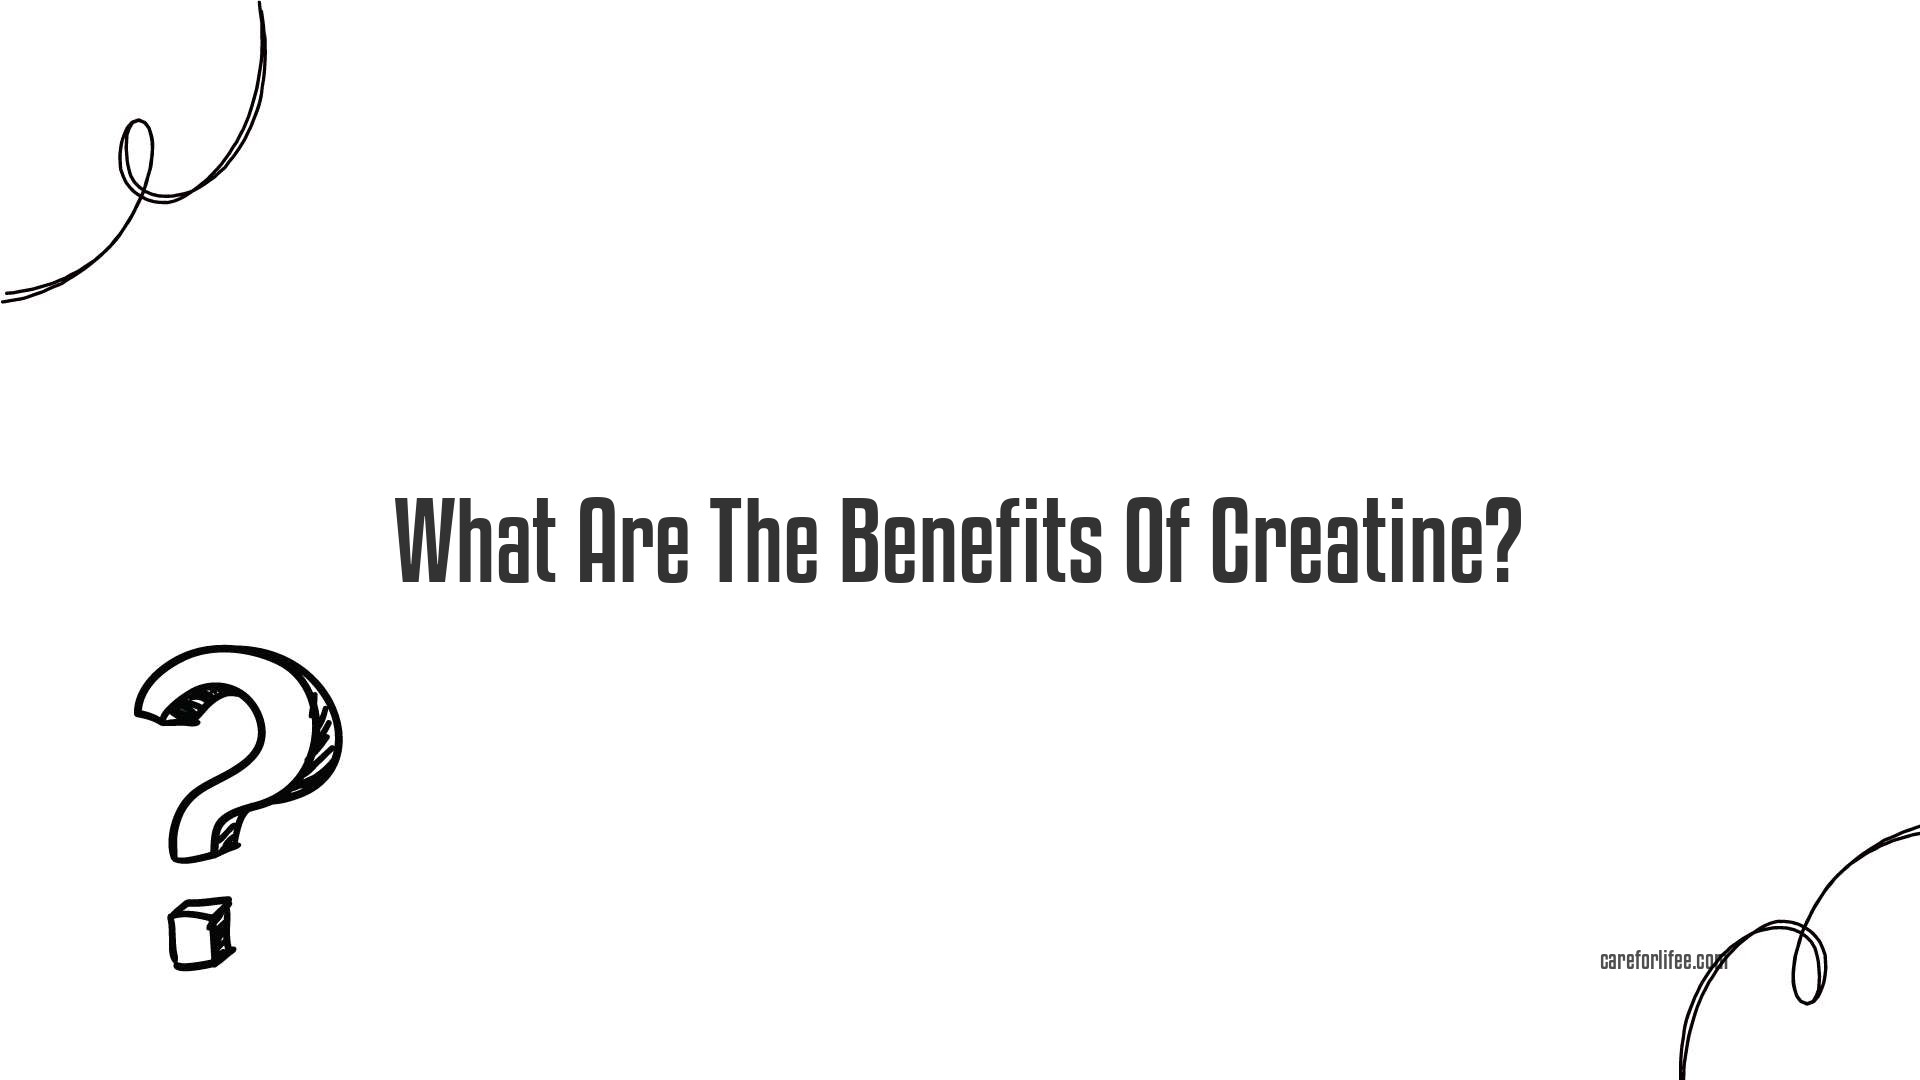 What Are The Benefits Of Creatine?